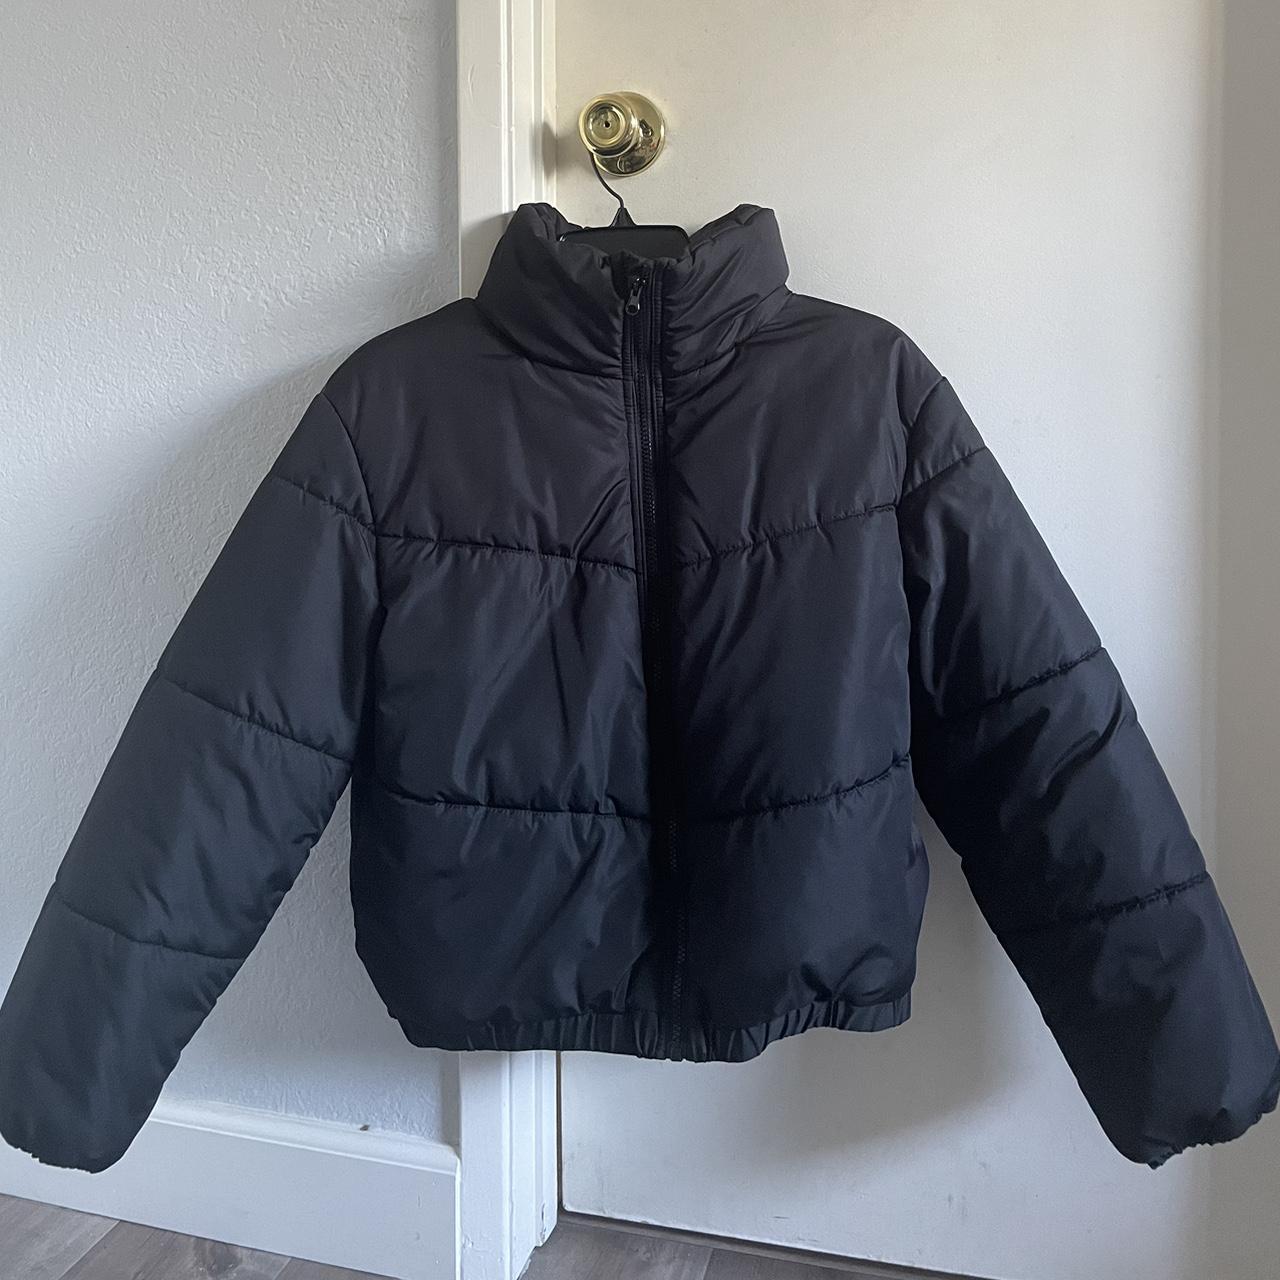 Black puffer jacket perfect basic for all year... - Depop